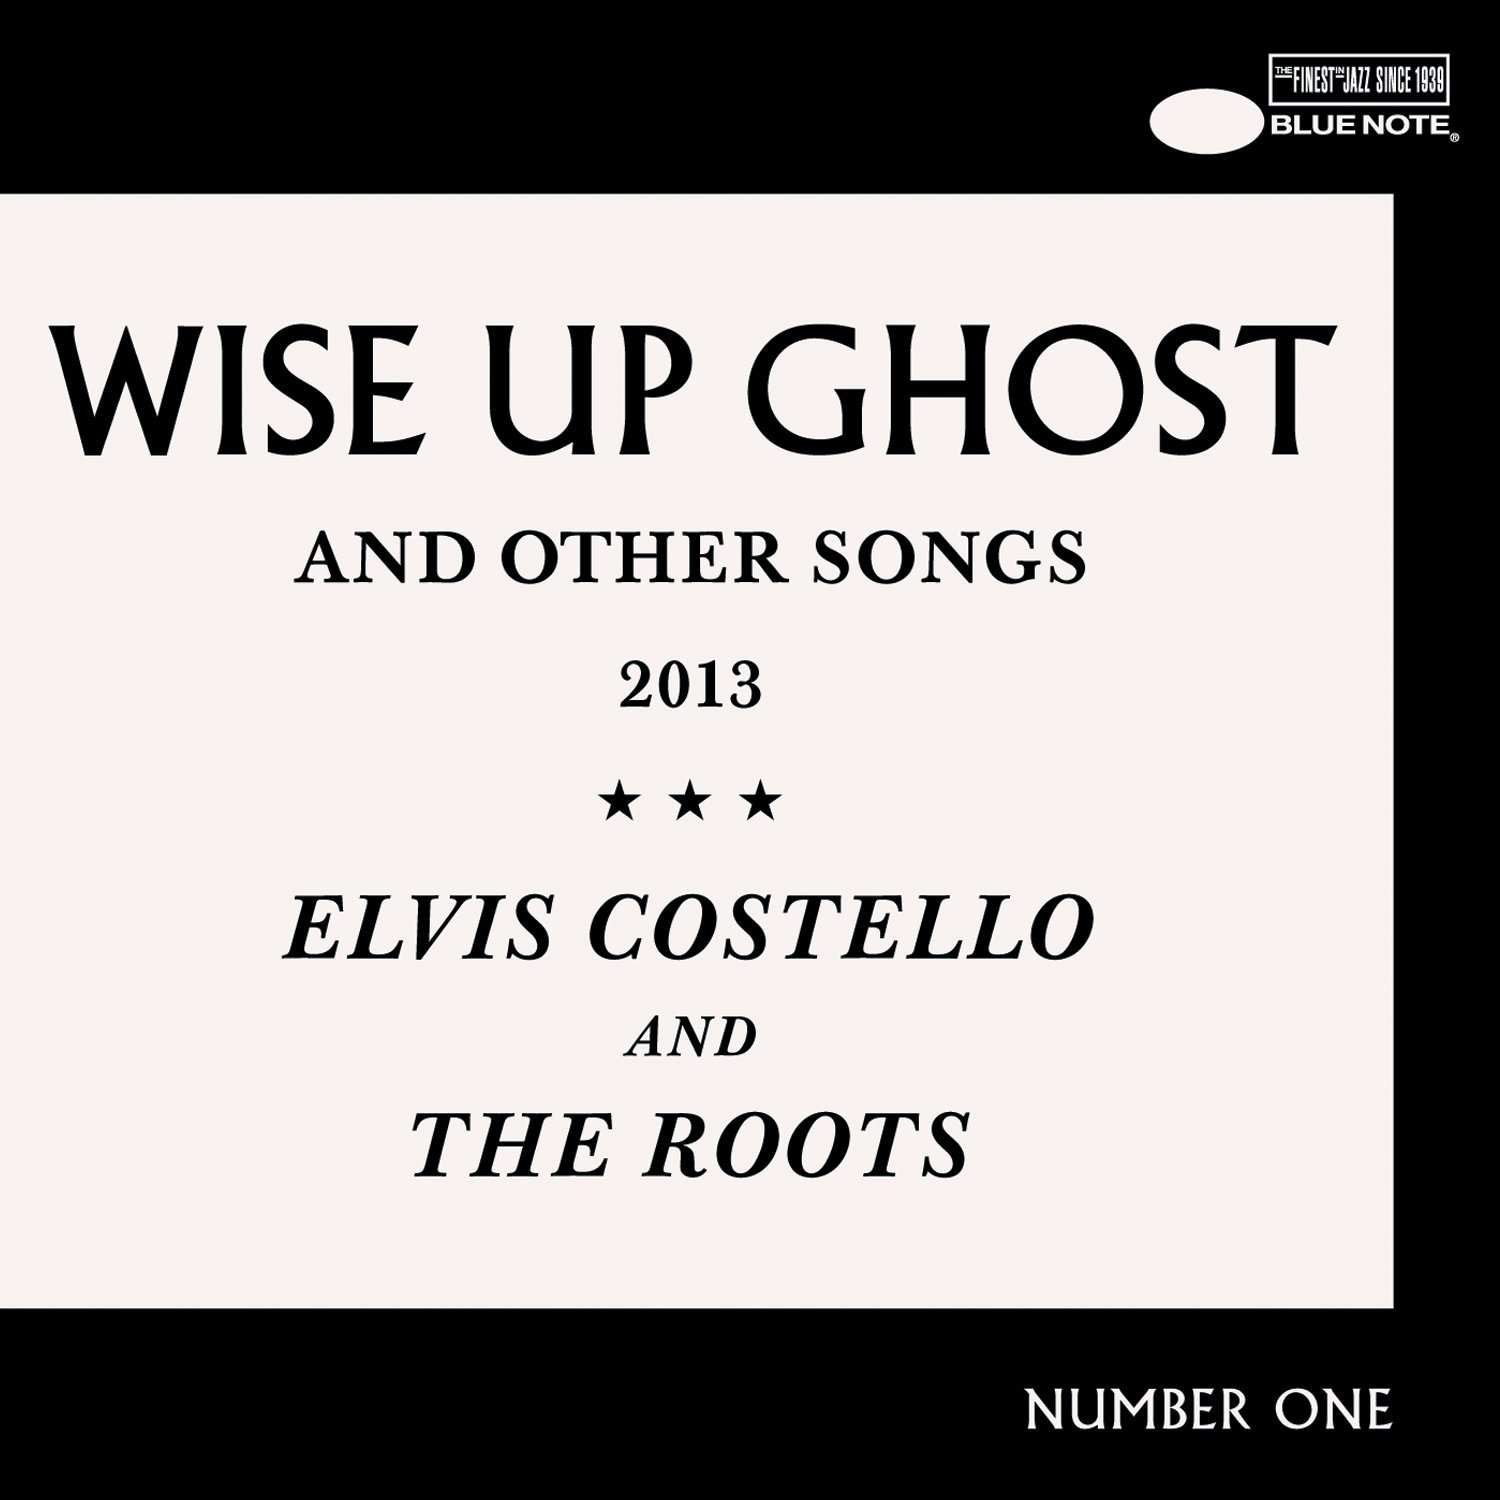 Elvis Costello And The Roots – Wise Up Ghost And Other Songs (2013) [HDTracks FLAC 24bit/44,1kHz]